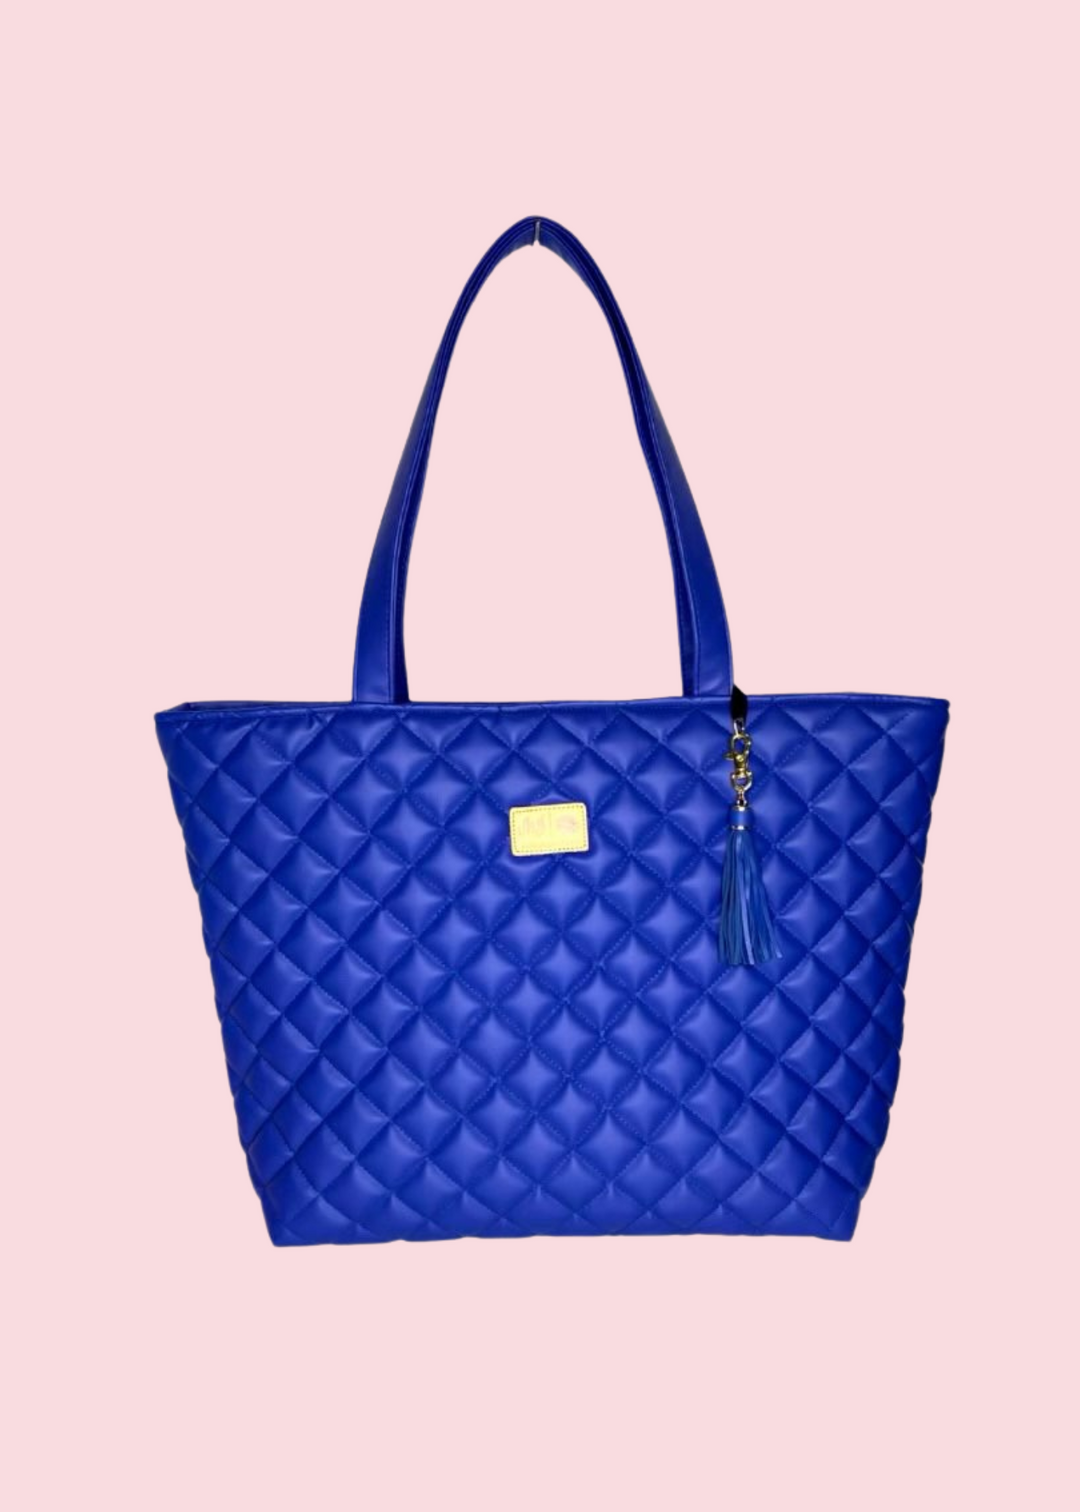 Makeup Junkie Bags - Luxe Cobalt Quilted Tote [Pre-Order]